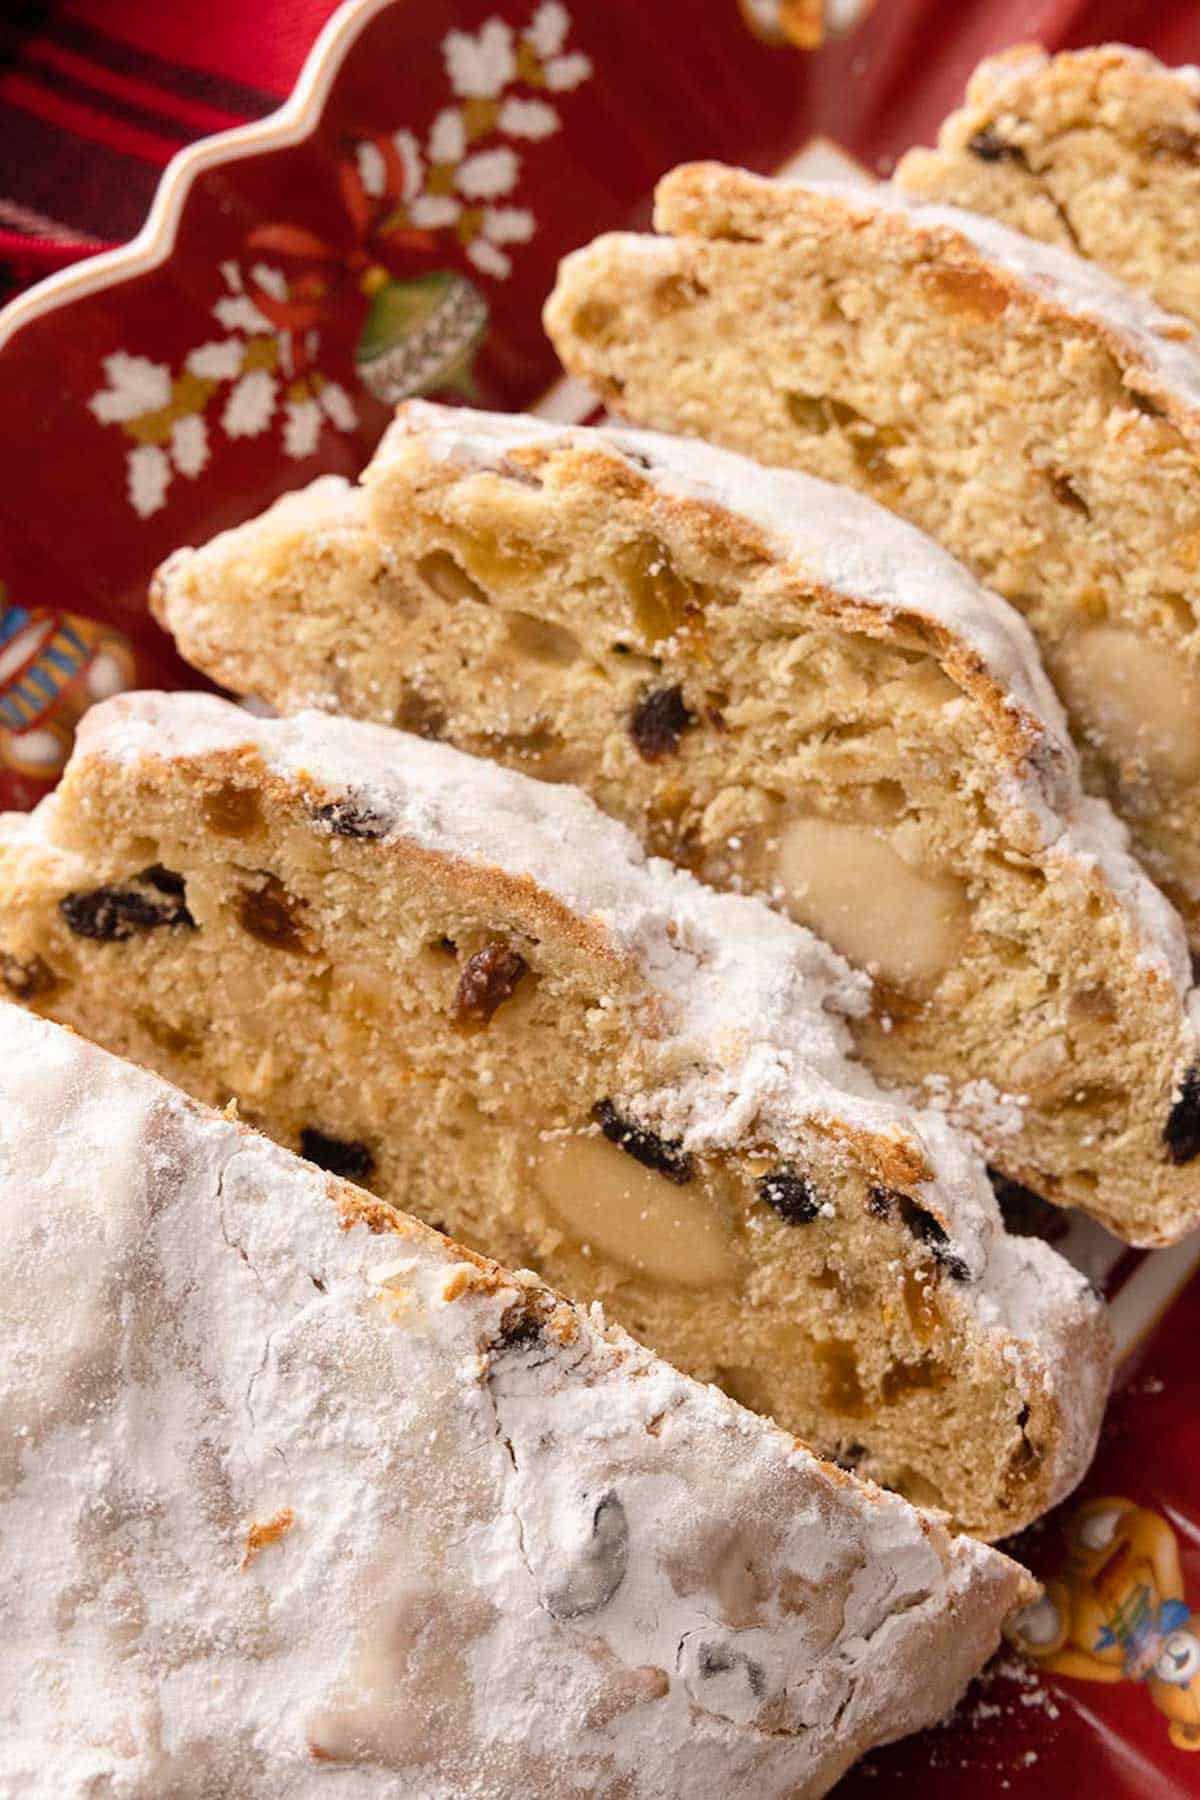 A loaf of stollen, sliced, showing the interior of the slices, dotted with rum soaked fruit.